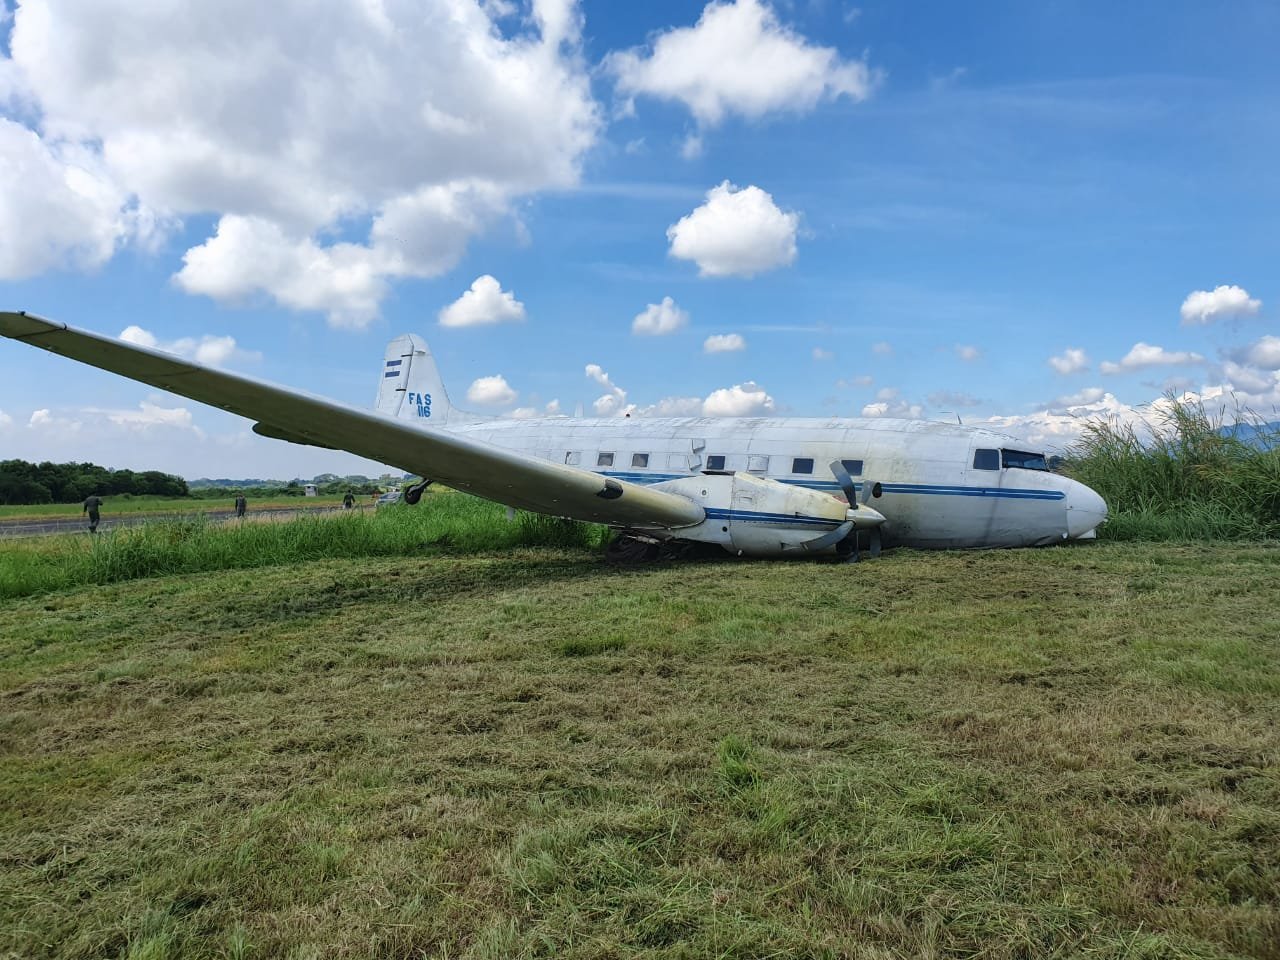 salvadoran-air-force-plane-carrying-parachutists-suffered-runway-excursion-on-takeoffsalvadoran-air-force-plane-carrying-parachutists-suffered-runway-excursion-on-takeoff